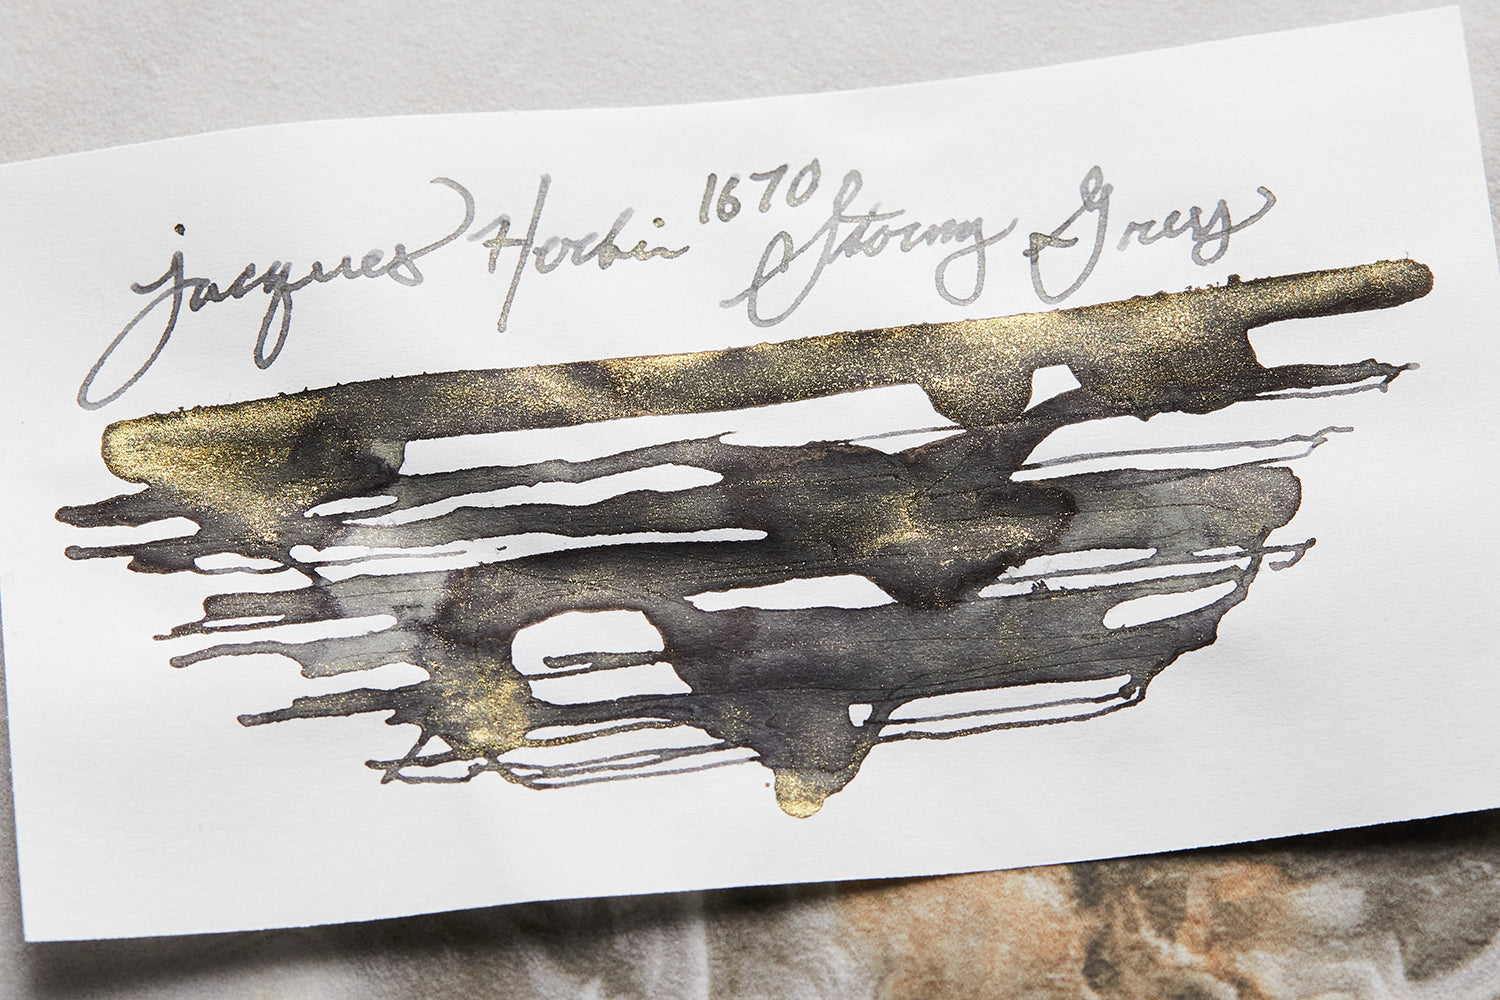 Jacques Herbin 1670 Stormy Grey fountain pen ink scratchy blob on light colored background